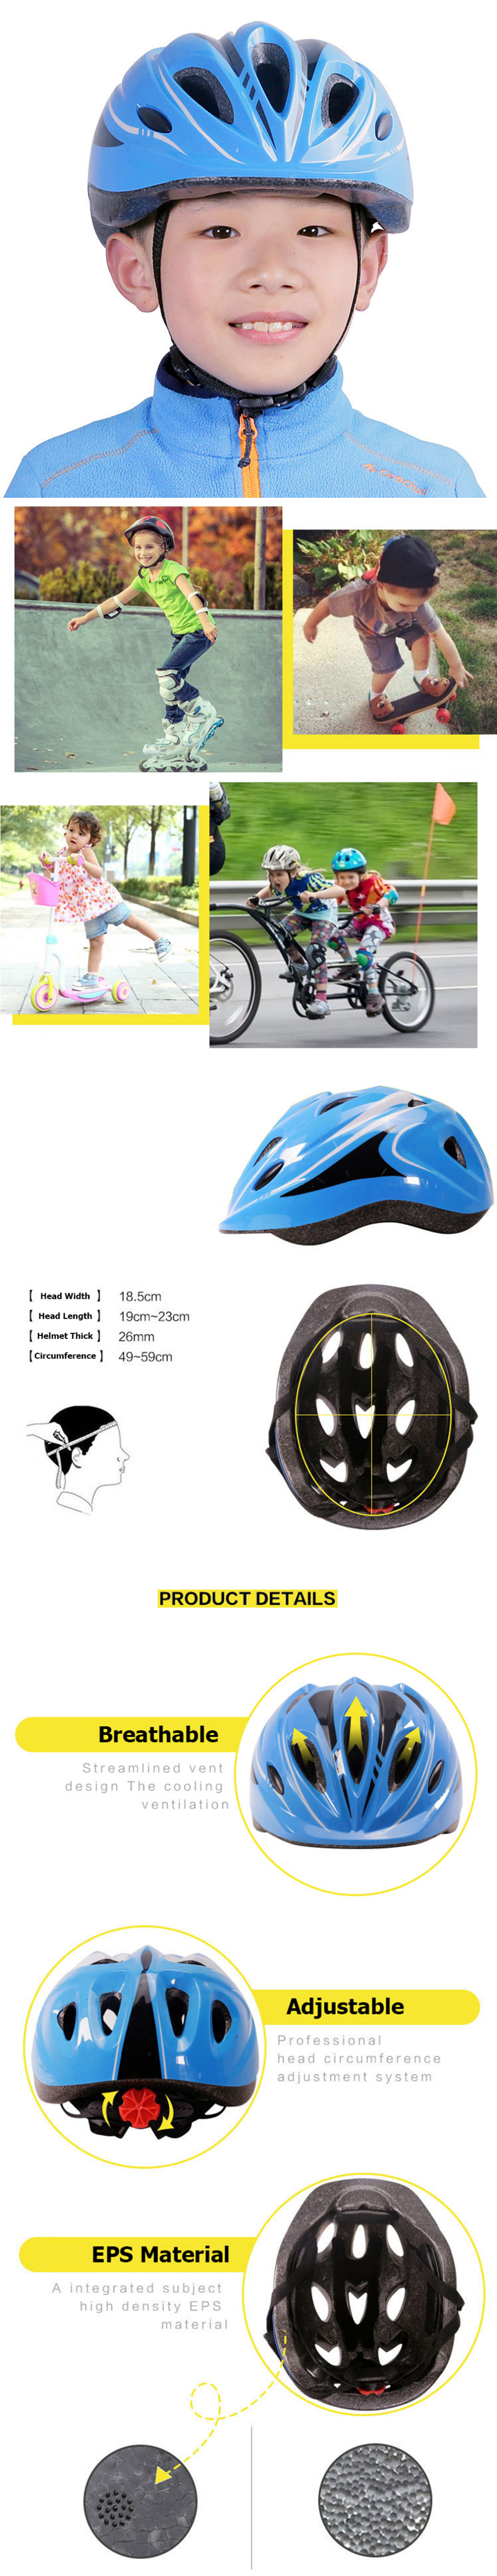 EPS-Ultralight-Kids-MTB-Road-Bike-Helmets-Children-Breathable-Bicycle-Helmet-Safety-Head-Protect-For-1708022-1